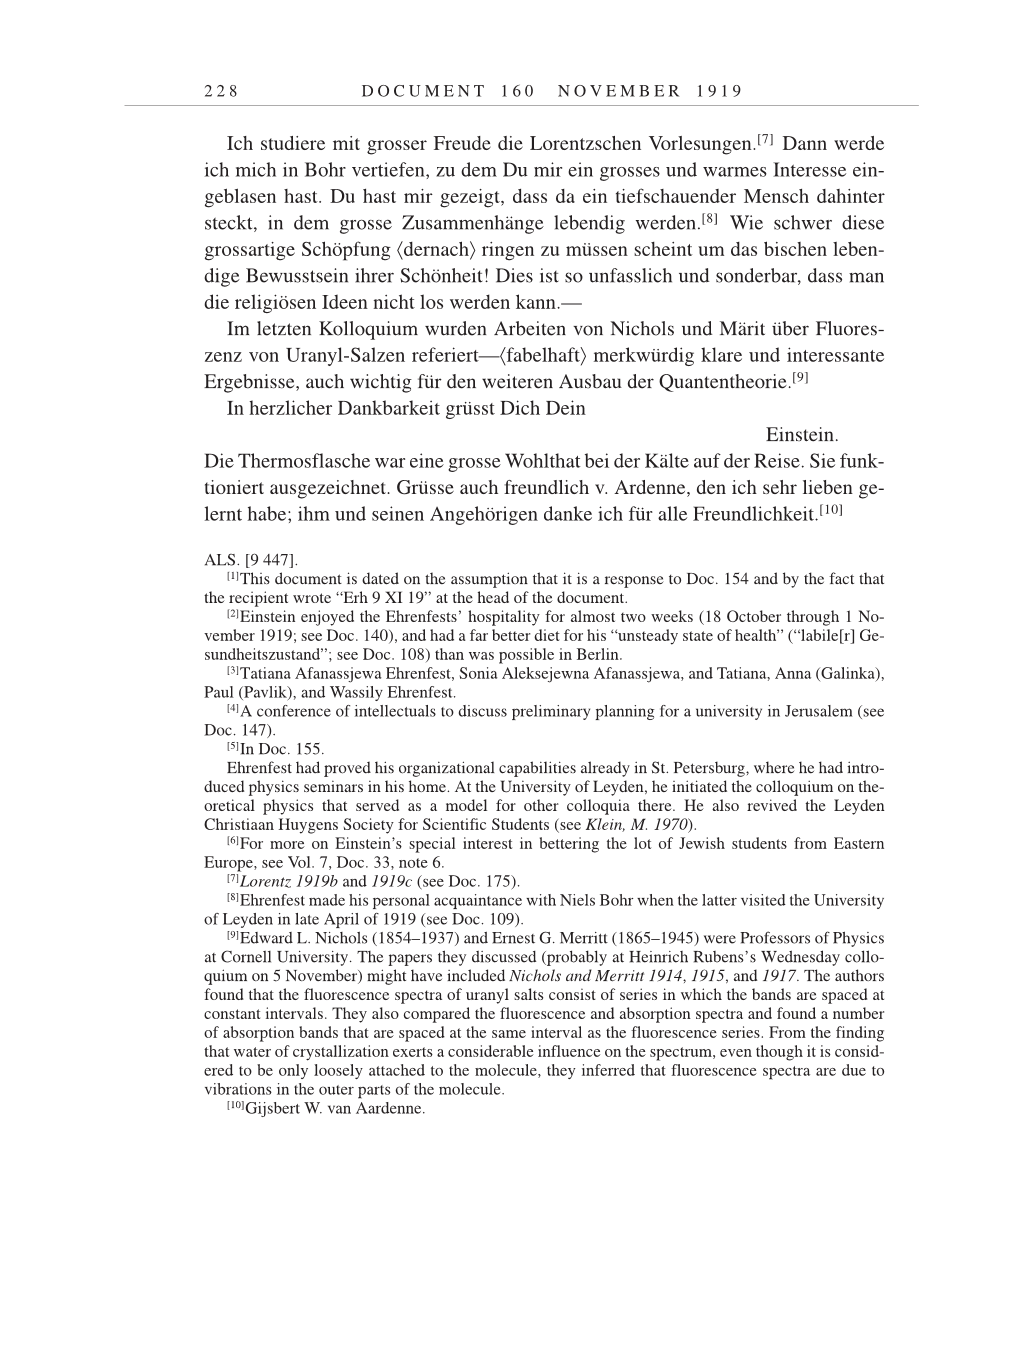 Volume 9: The Berlin Years: Correspondence January 1919-April 1920 page 228